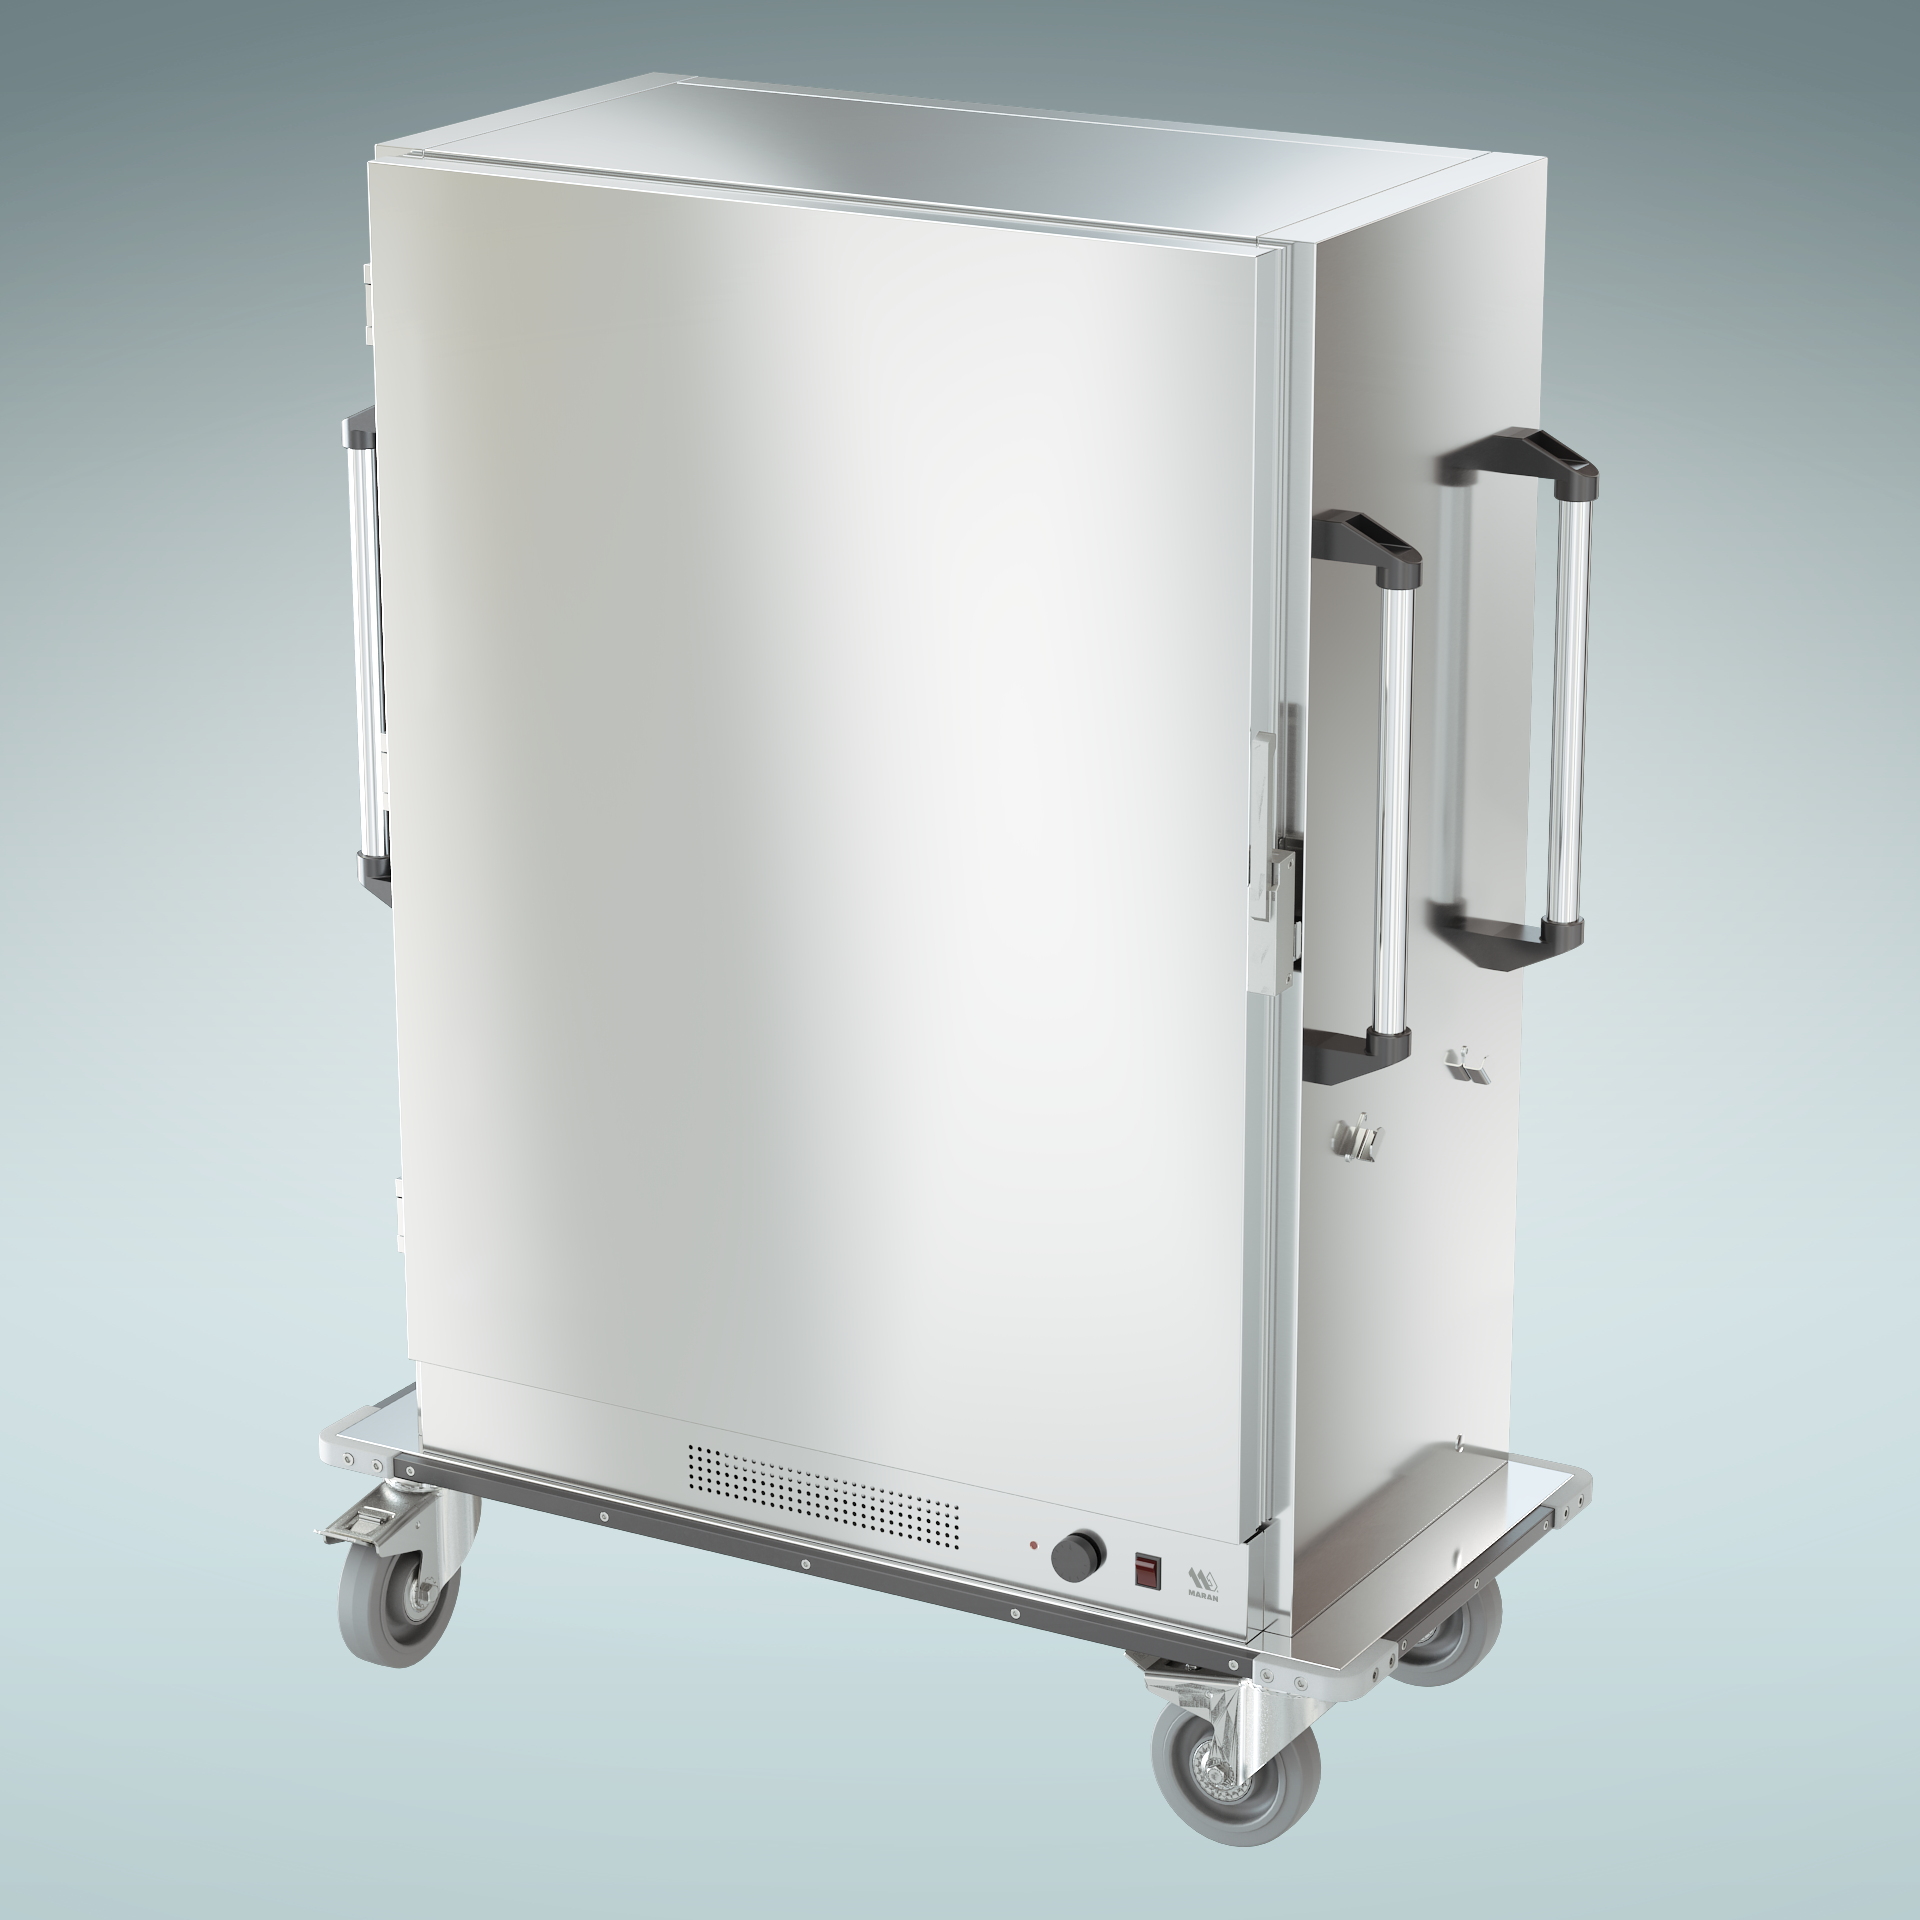 Heated meal dispenser trolley cabinet